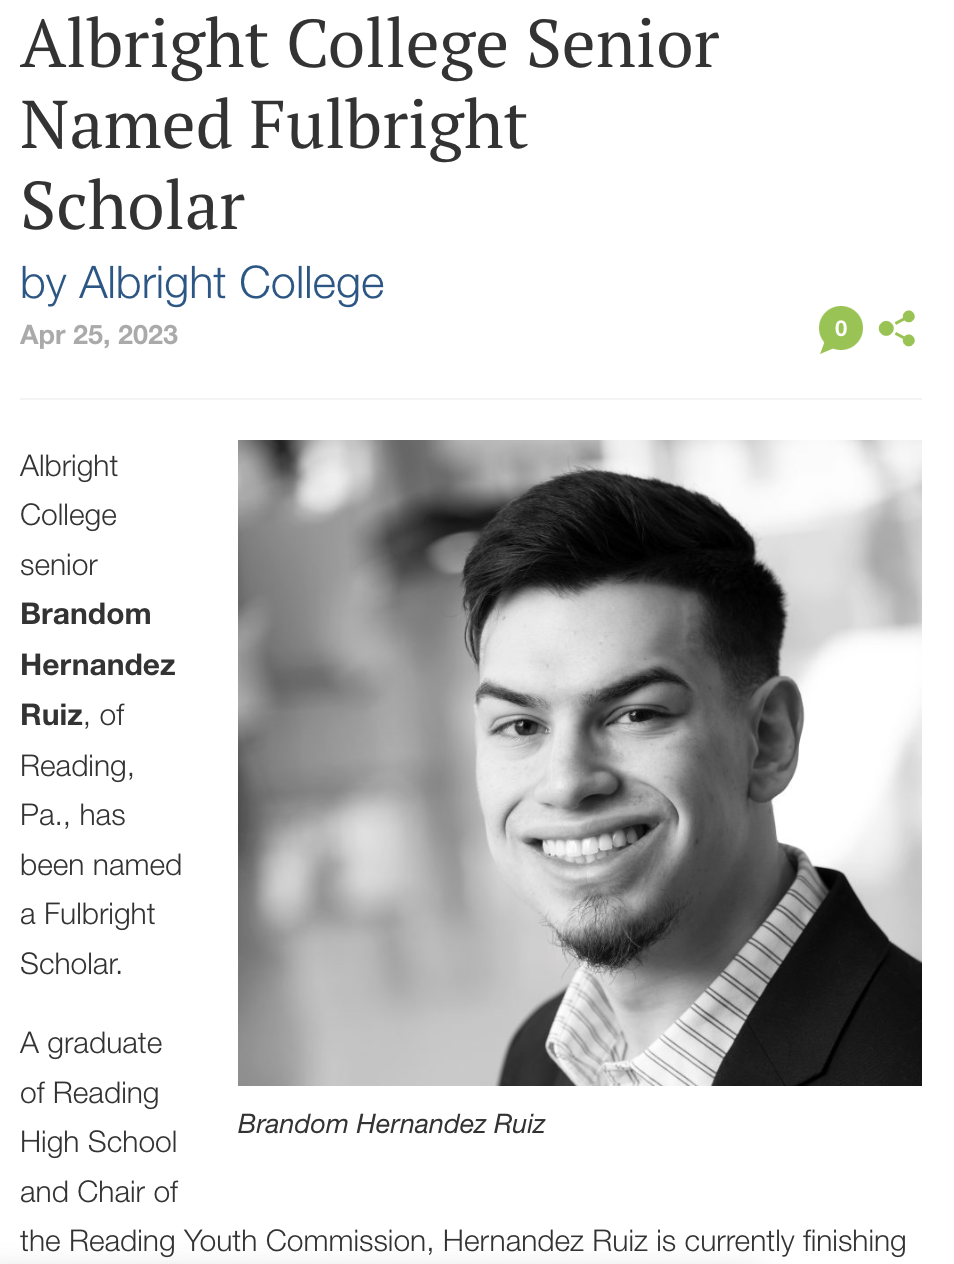 We are pleased to announce that TRIALS Class of 2023 student Brandom Hernandez has been selected as a Fulbright Scholar